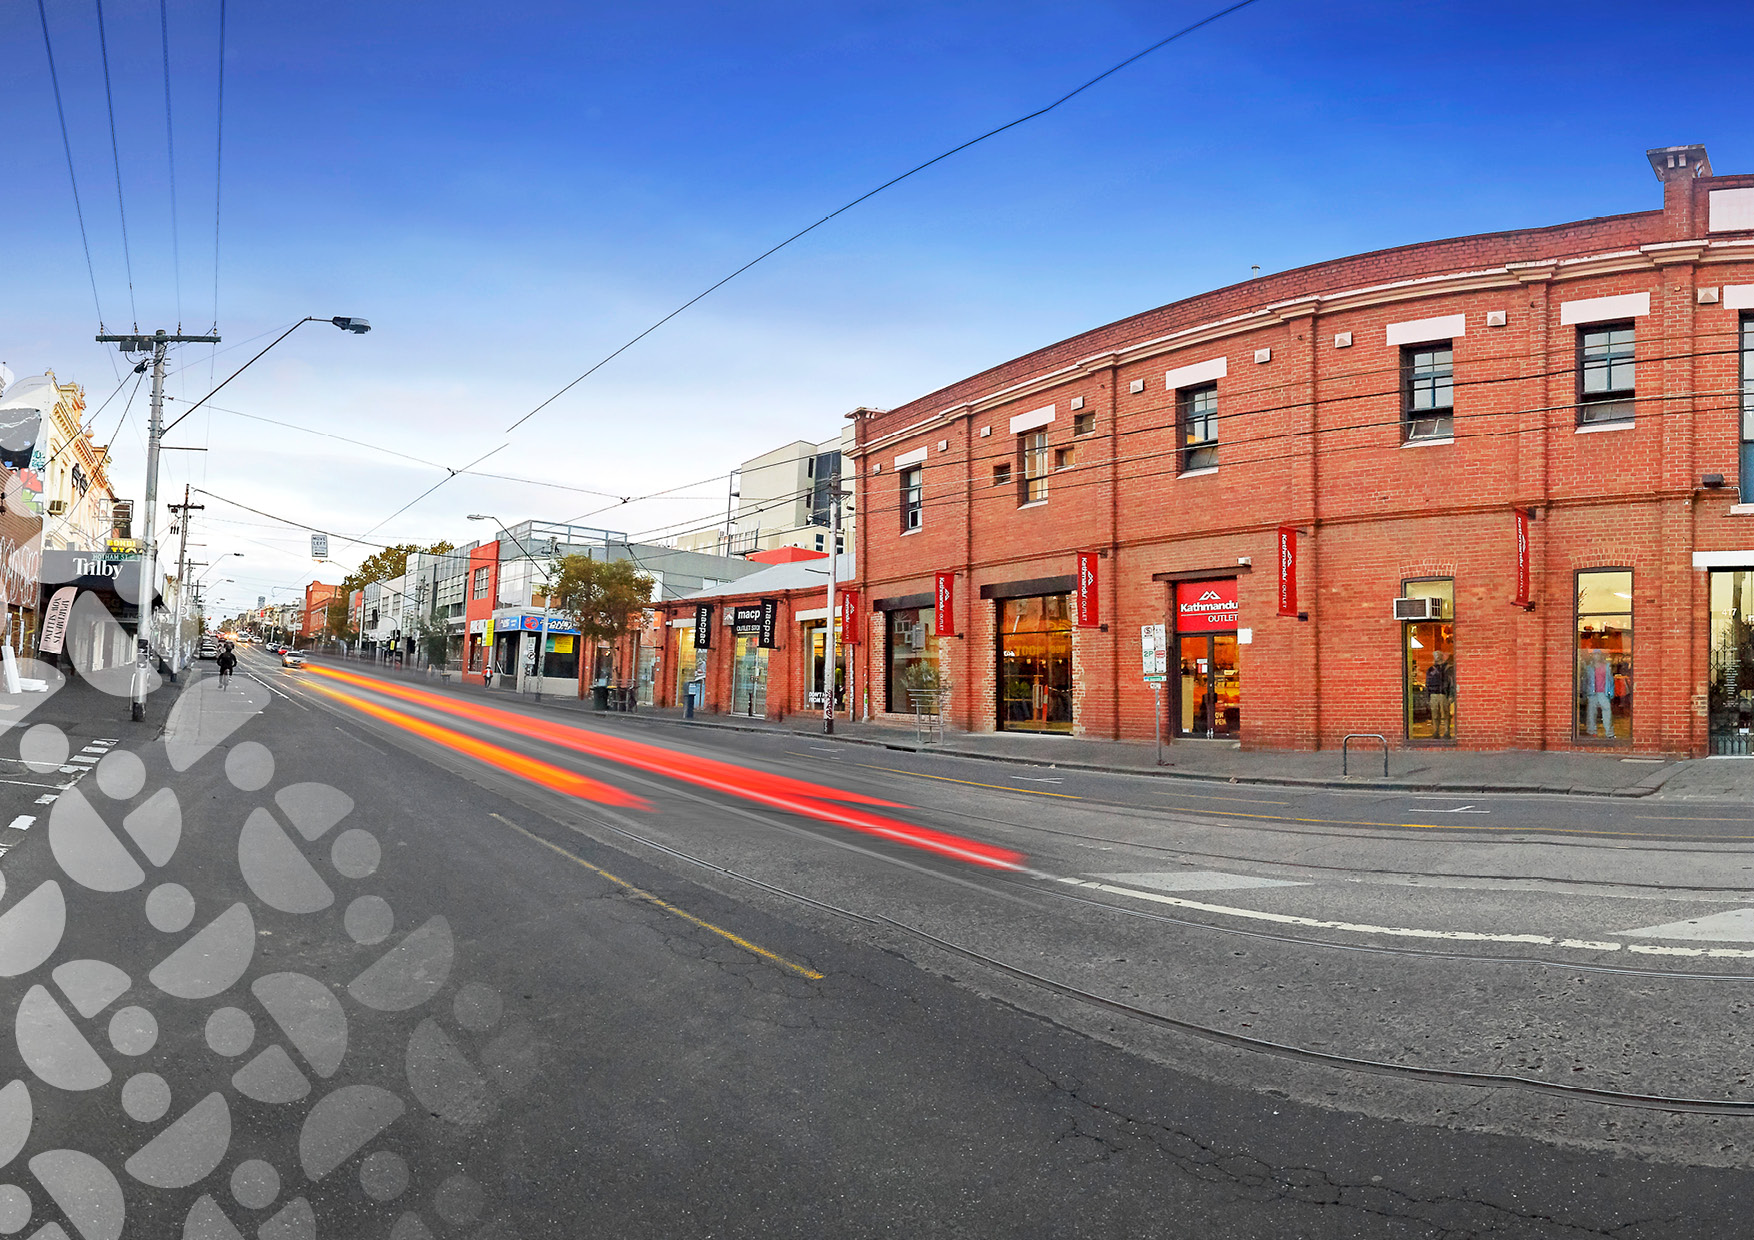 Sold Smith Leicester Holdings Fitzroy 411-421 Smith Street Retail Commercial Real Estate